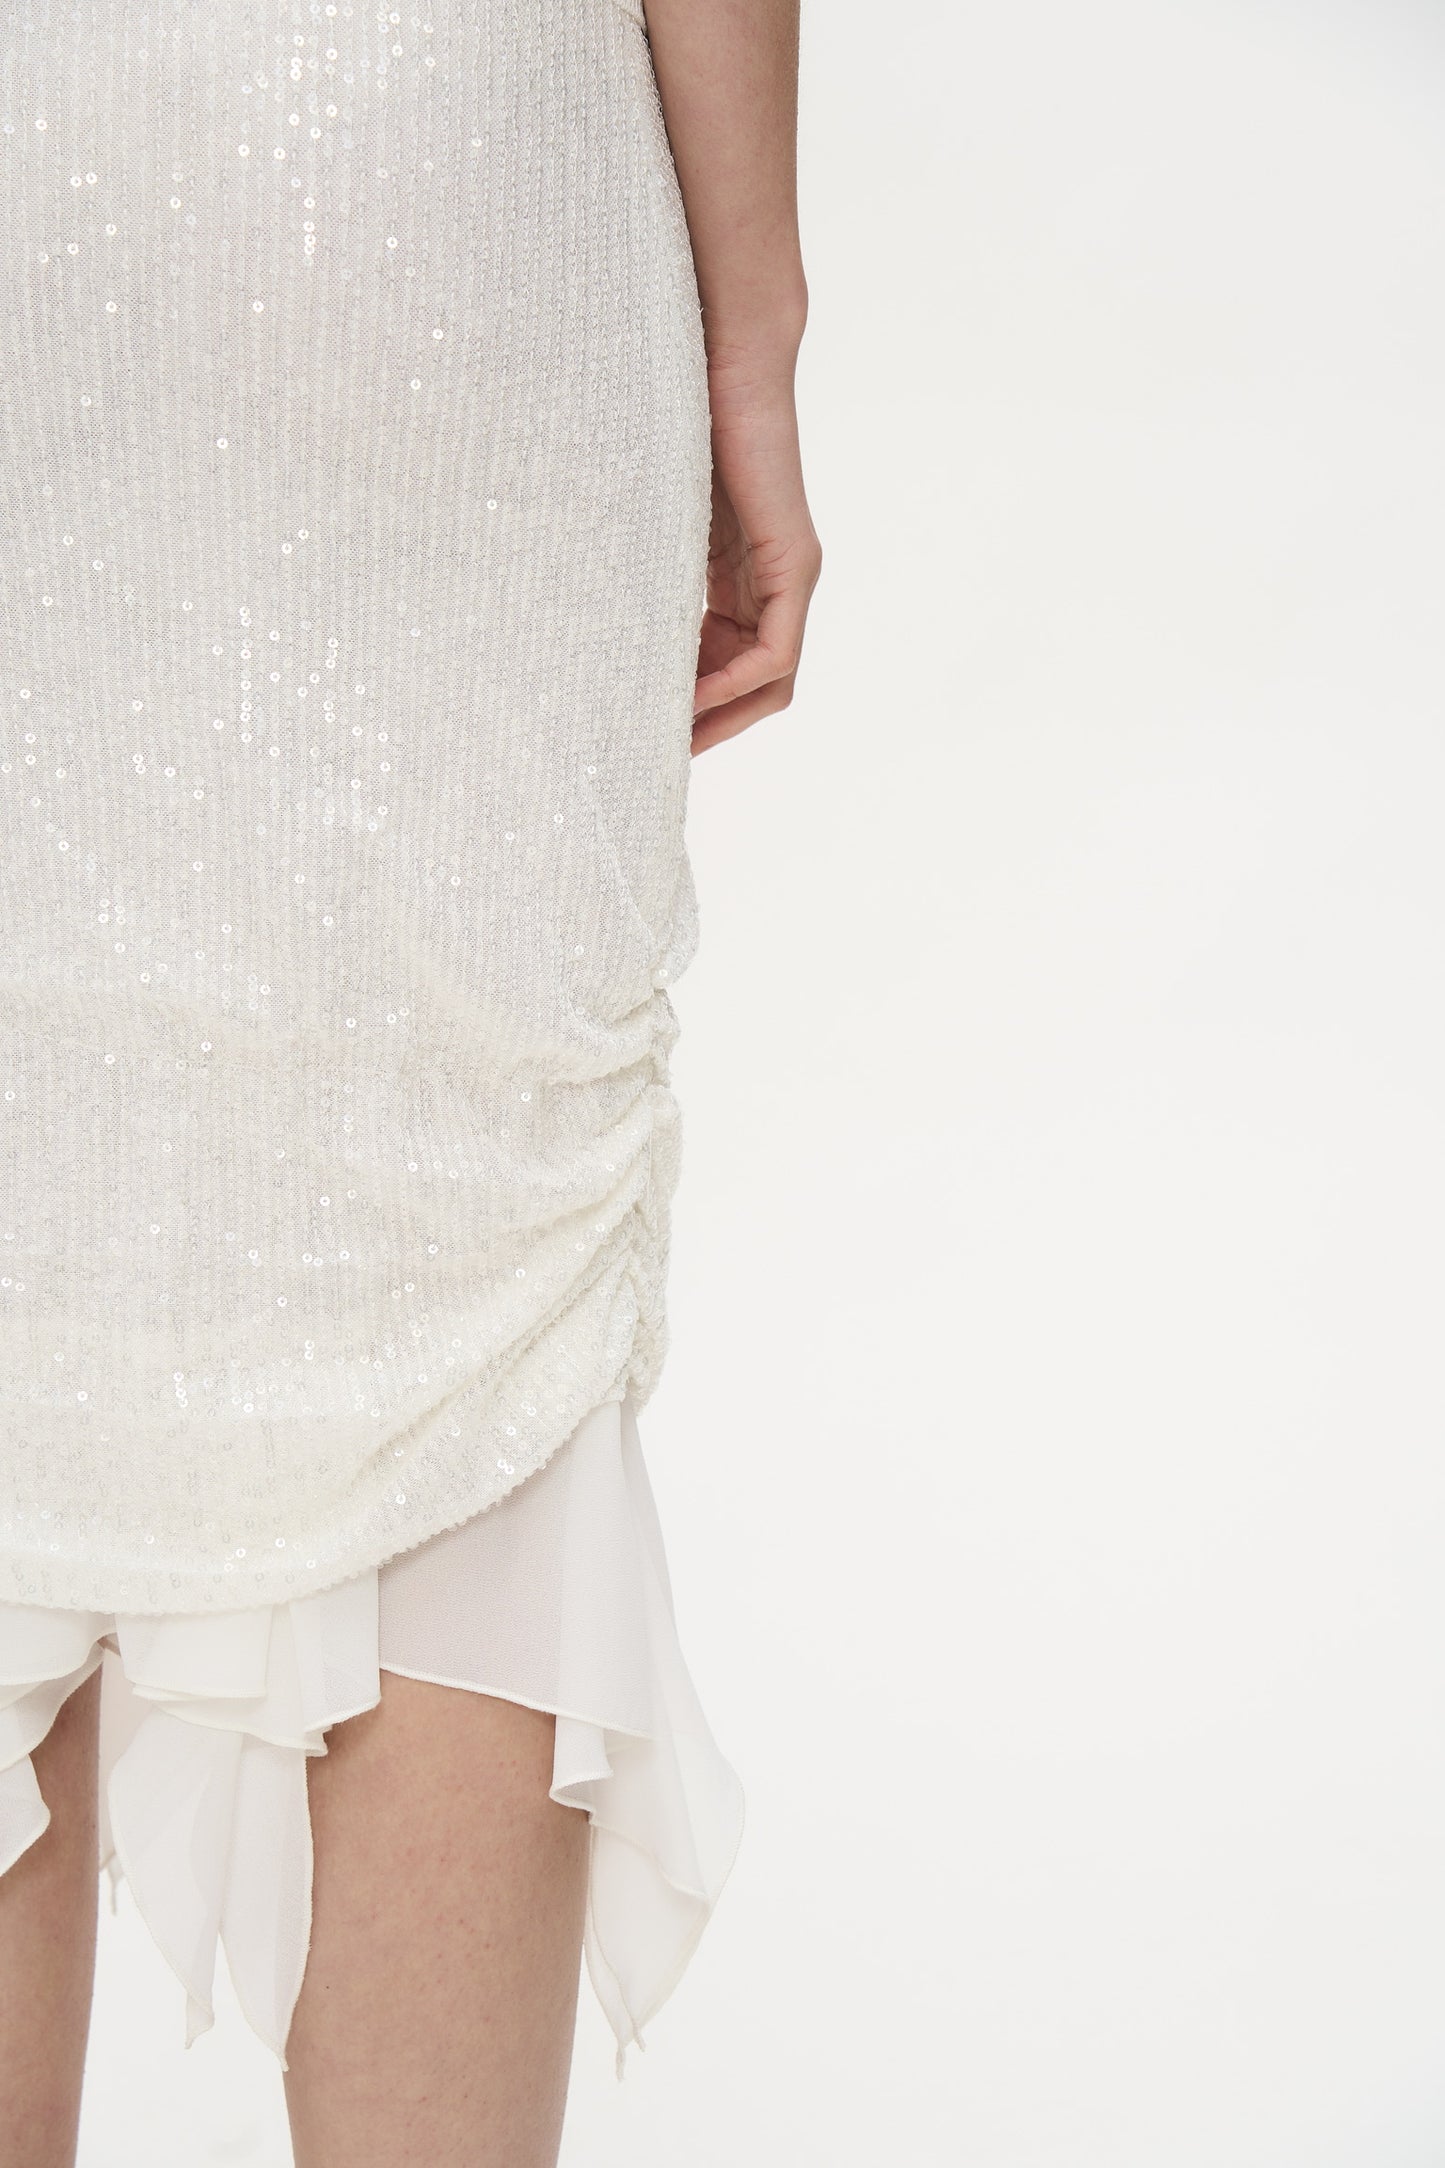 Sella Patchwork Sequin Skirt in White